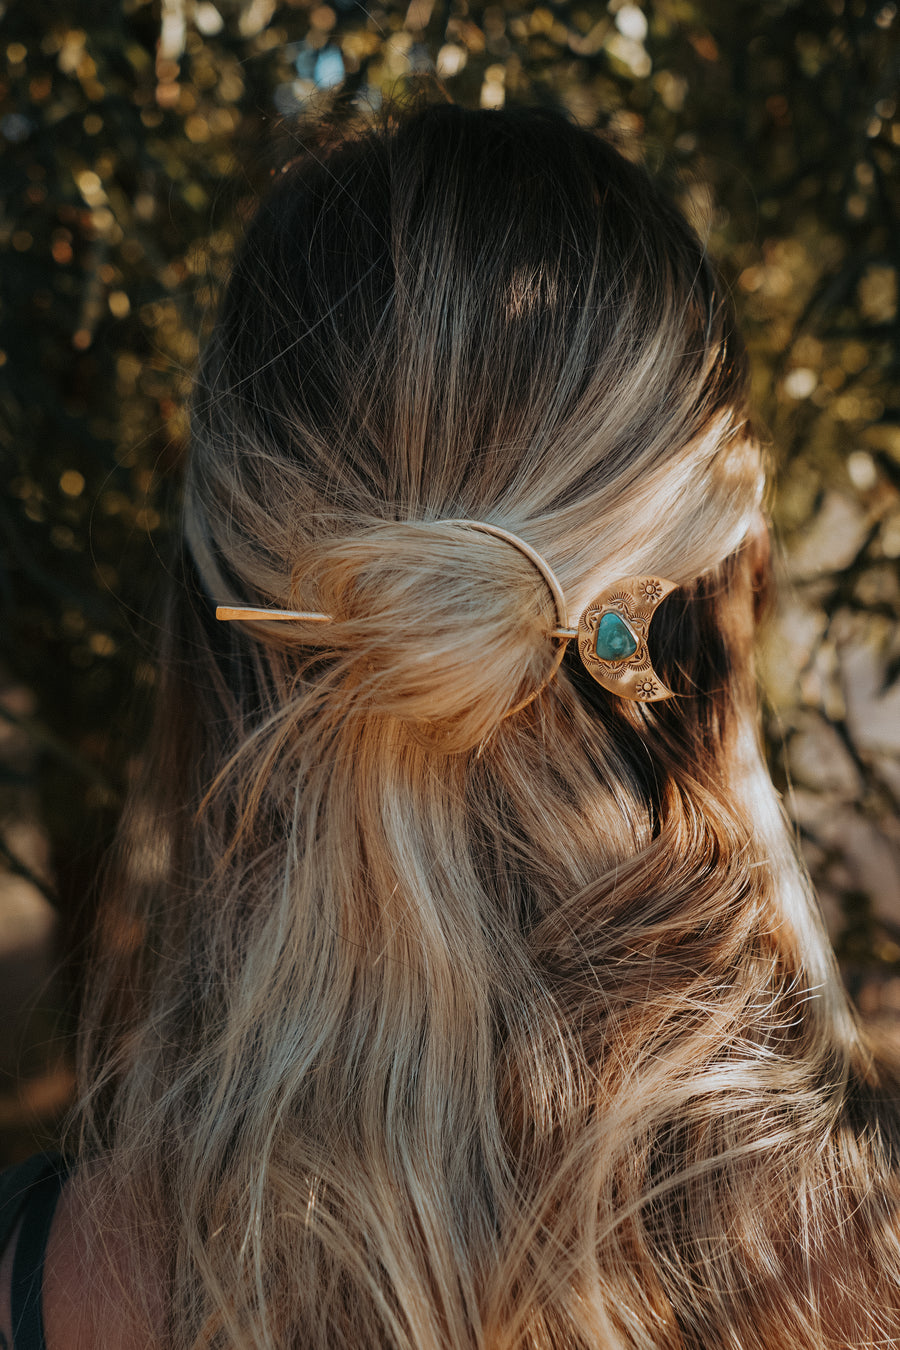 The Wanderer Hairpin in Sandhill Turquoise